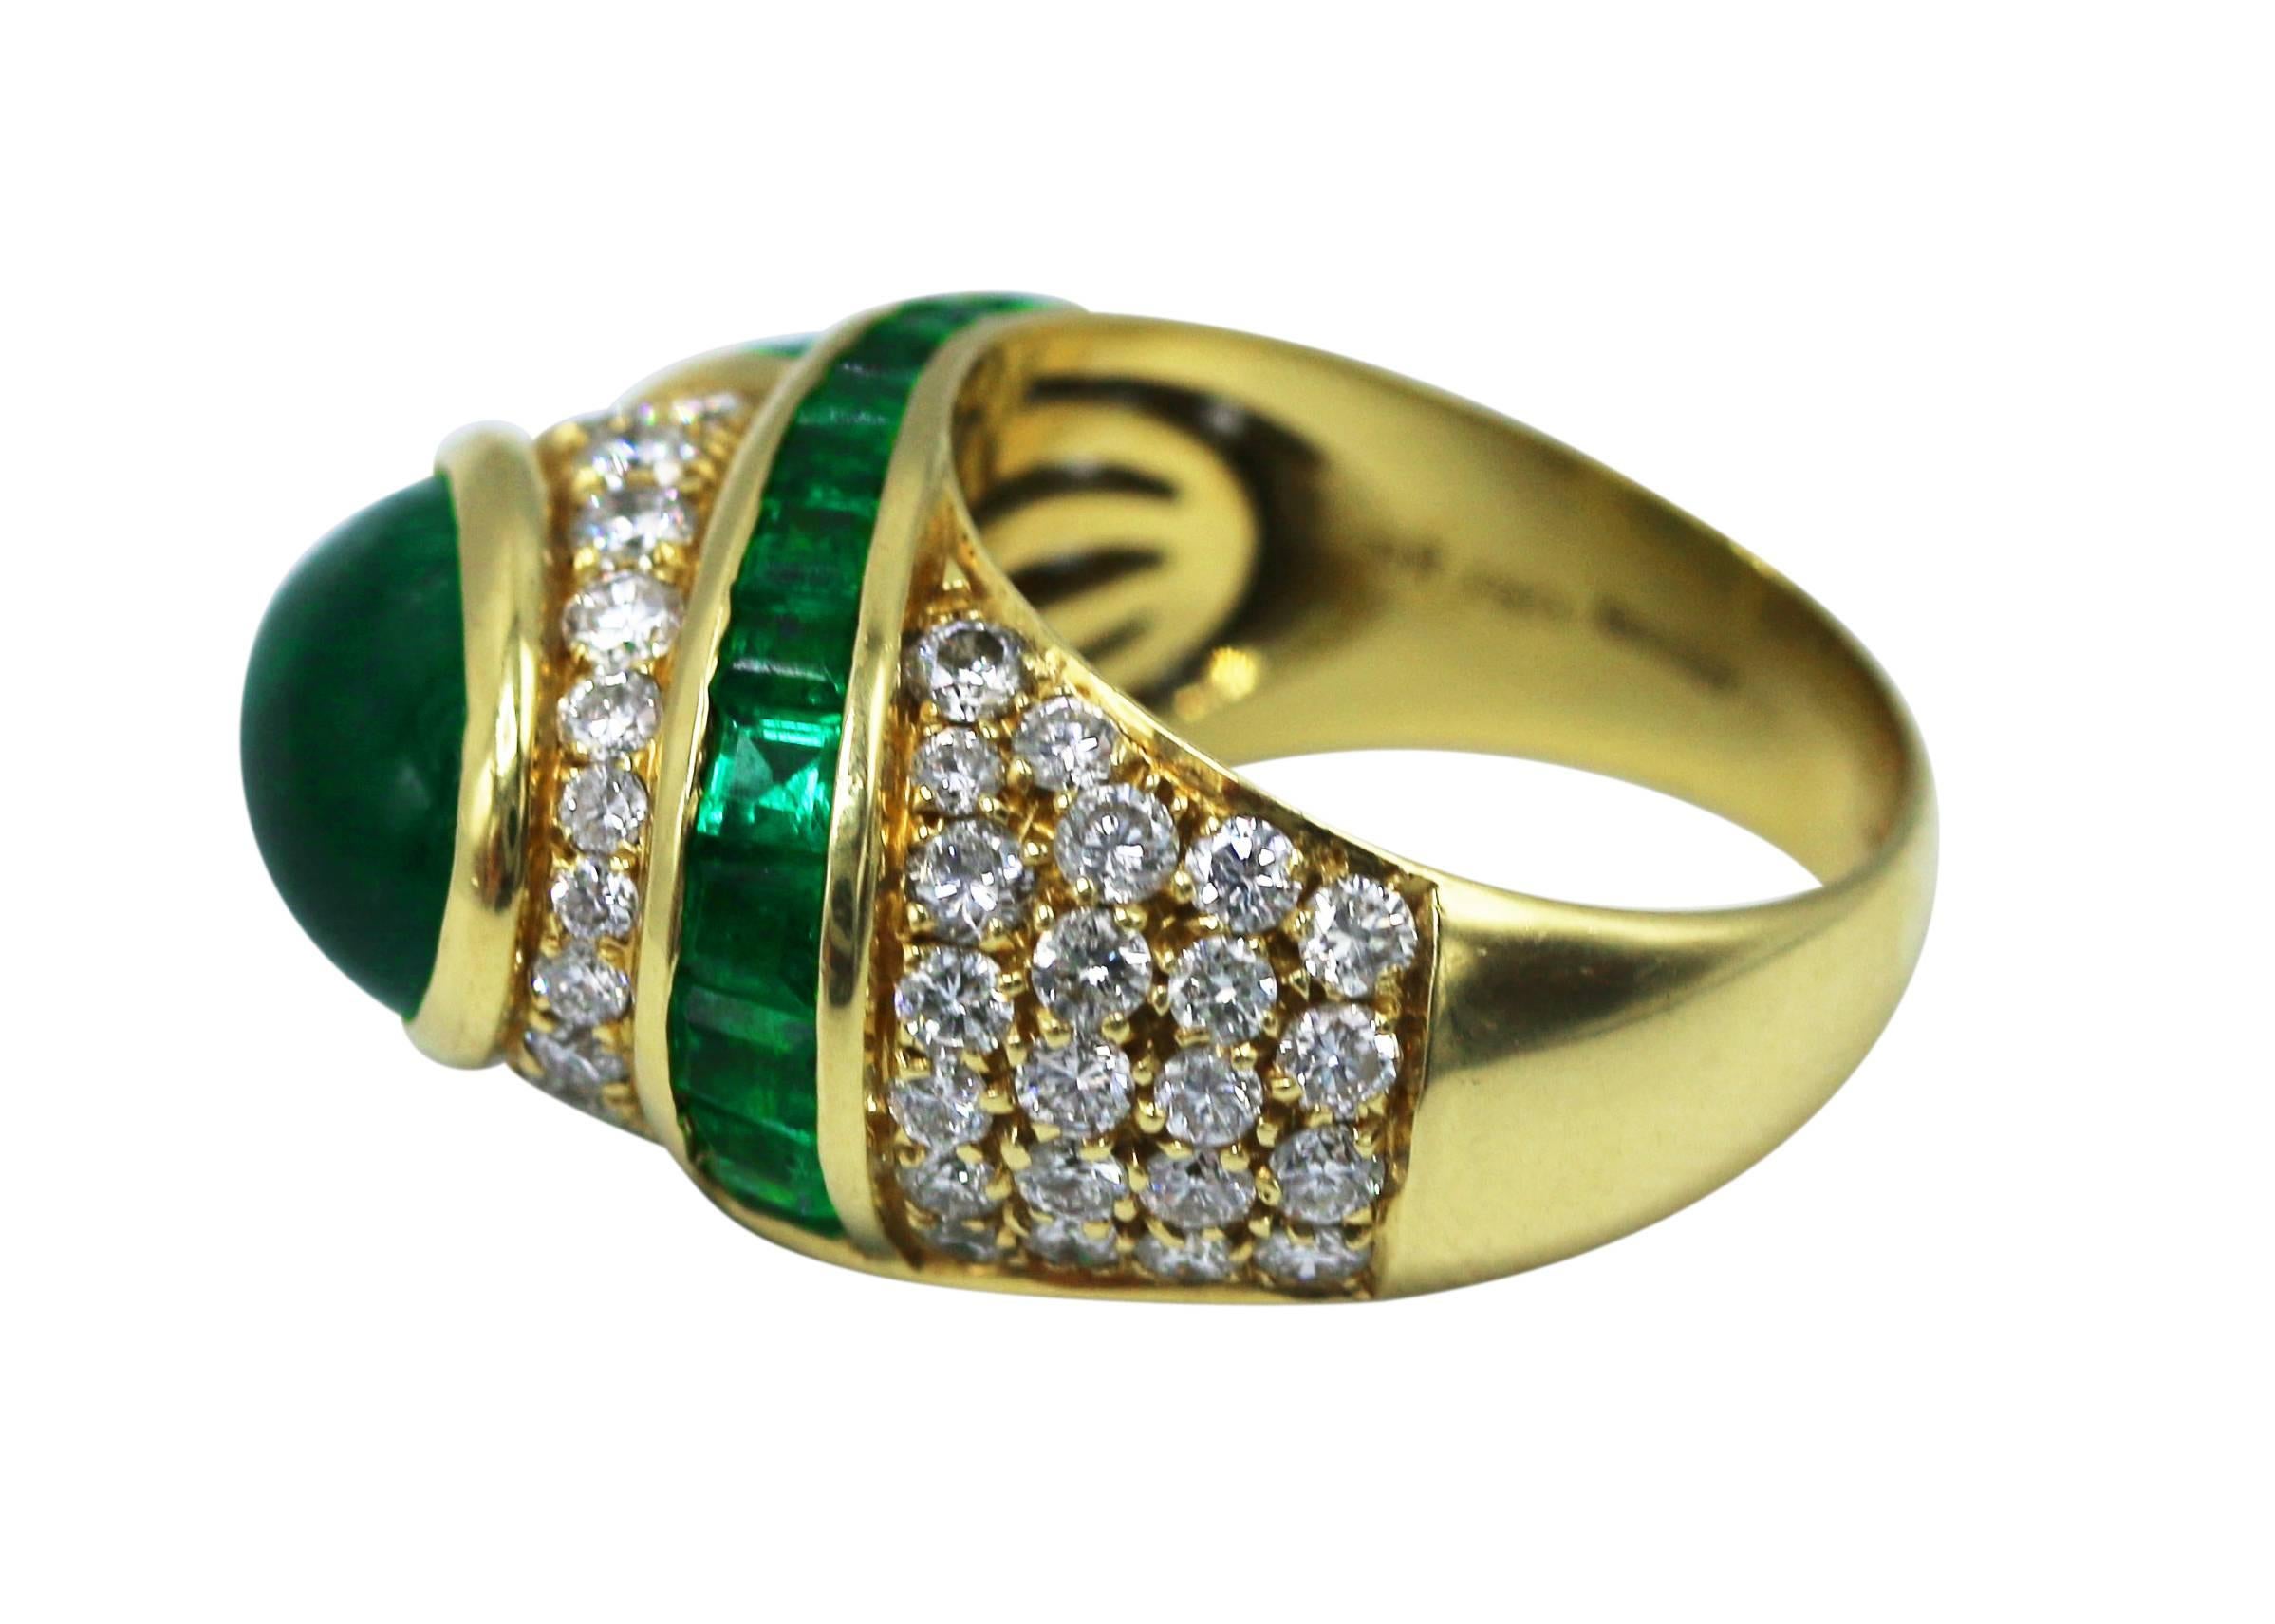 Superb 18 karat yellow gold, emerald and diamond ring by Chaumet, Paris, set in the center with a cabochon emerald, framed by sections of calibre-cut emeralds, and round diamonds weighing approximately 1.70 carats, the total emerald weight 6.00